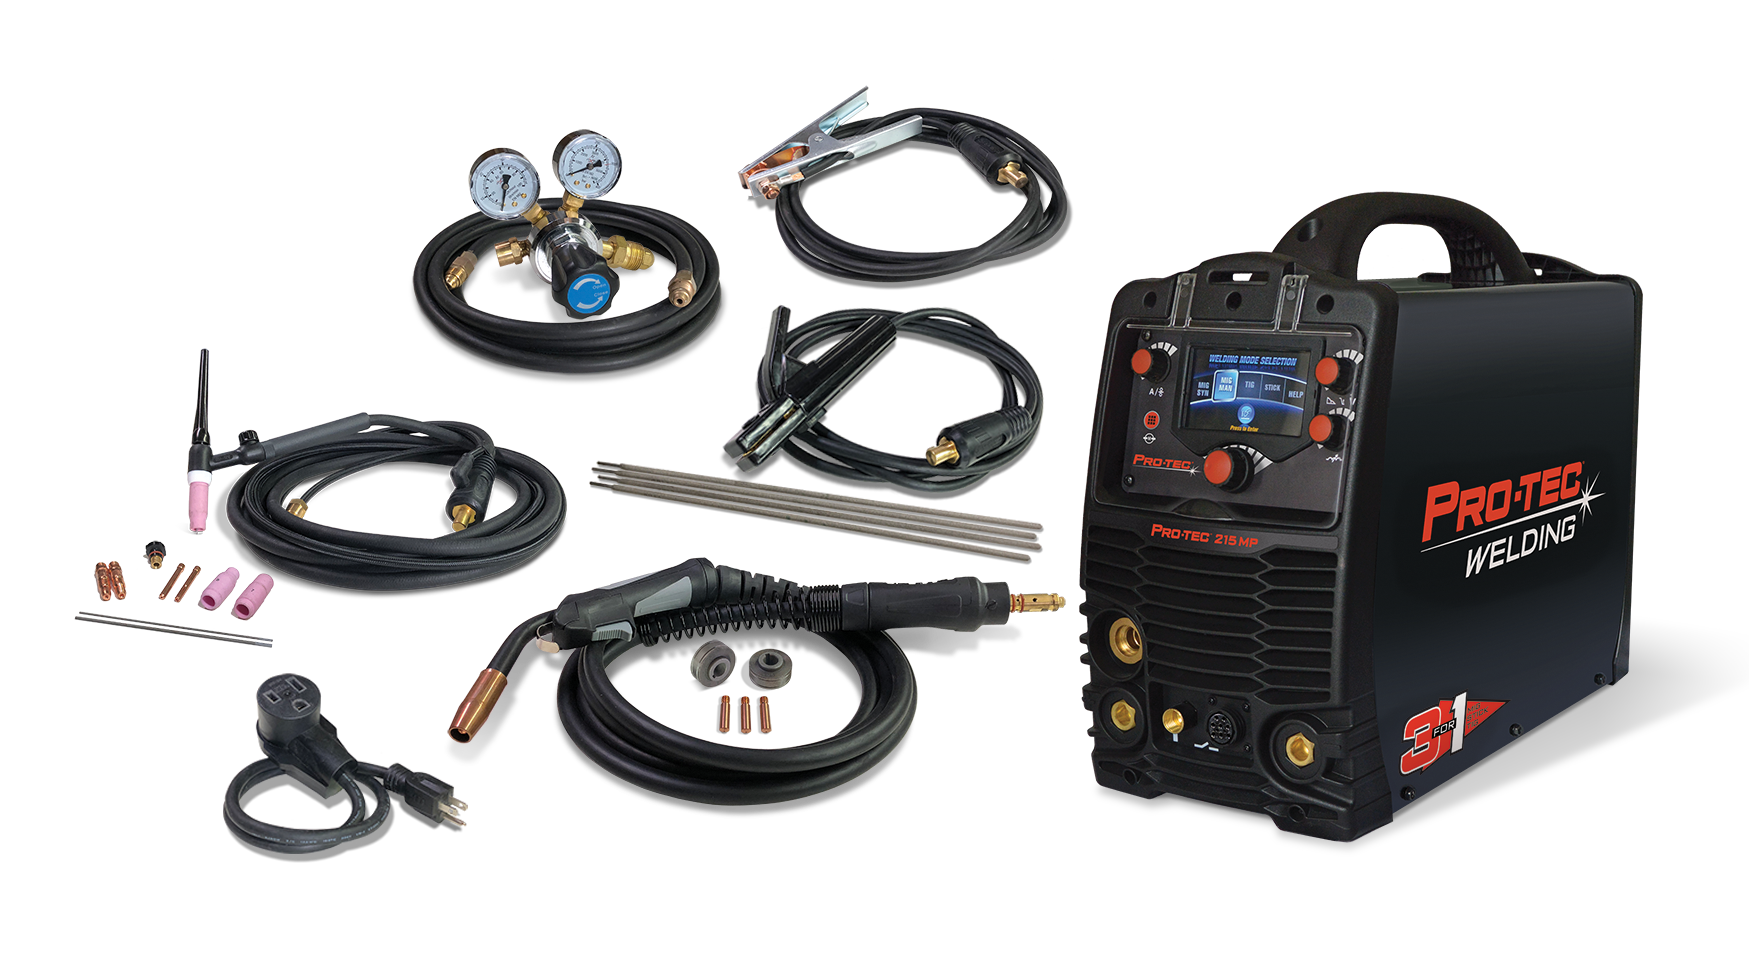 PRO-TEC® 215 MP Multi-Process Welding System | Outlaw Leather